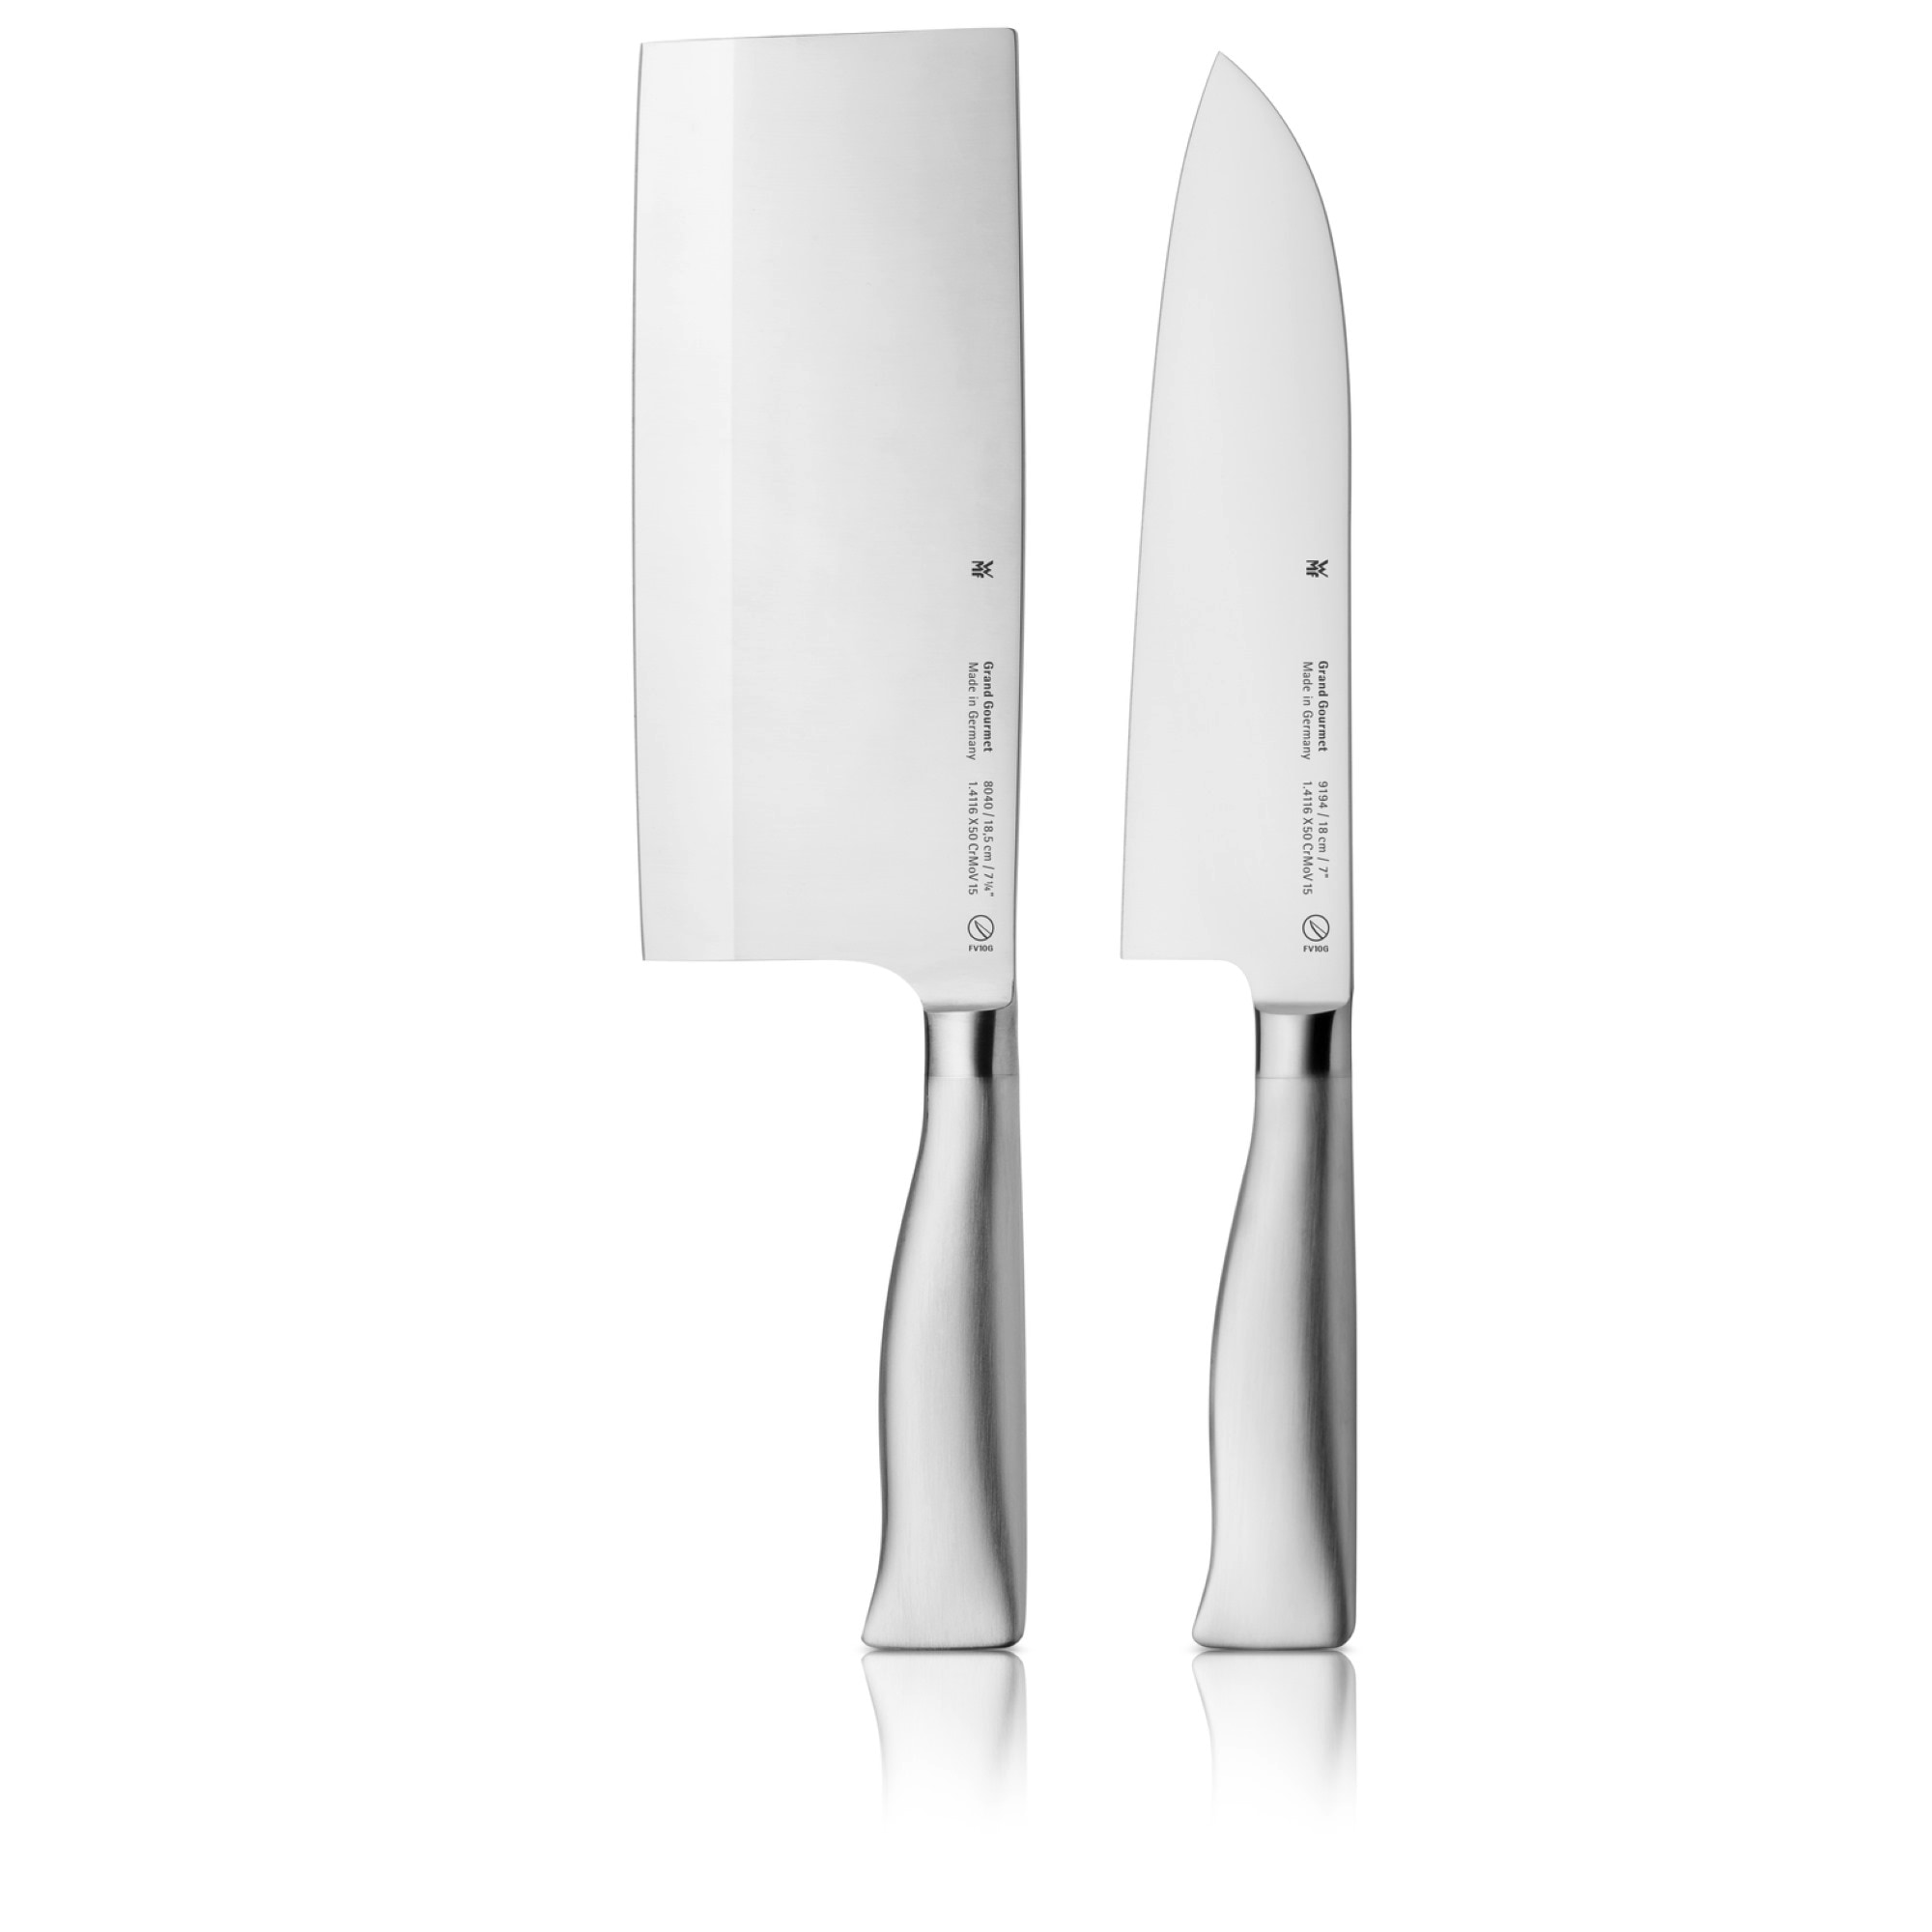 WMF Messer-Set »Grand Gourmet«, (Set, 2 tlg.), Asia Messerset, Made in Germany